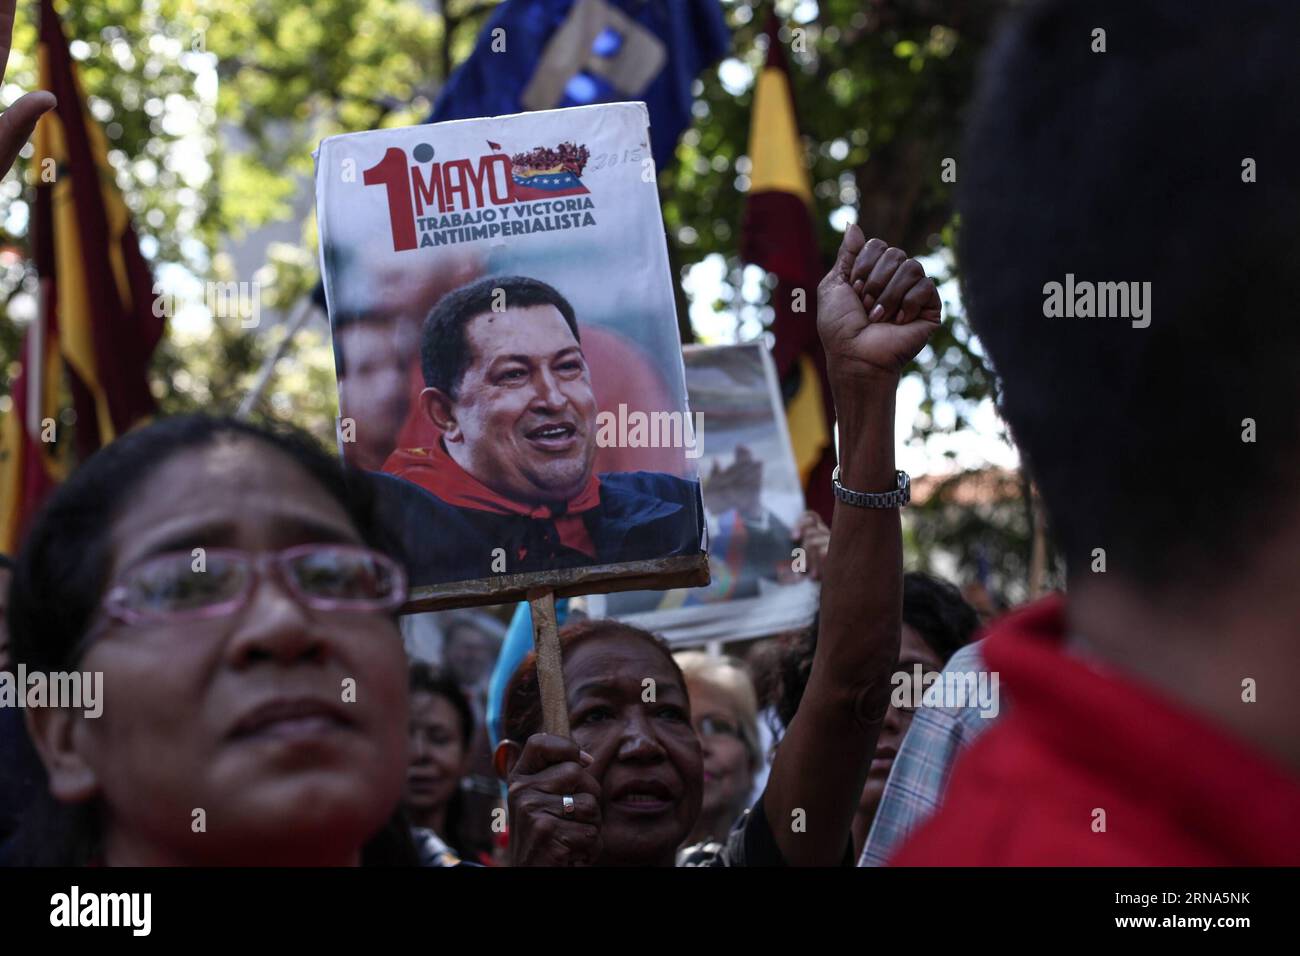 (160107) -- CARACAS, Jan. 7, 2016 -- A woman holds a banner during a rally held by members of social movements to reject the removal of images of Simon Bolivar, the founding father of Venezuelan Independence, and late Venezuelan President Hugo Chavez from the National Assembly, around the Plaza Bolivar in Caracas, Venezuela, on Jan. 7, 2016. Boris Vergara) (jg) (fnc) VENEZUELA-CARACAS-RALLY e BorisxVergara PUBLICATIONxNOTxINxCHN   160107 Caracas Jan 7 2016 a Woman holds a Banner during a Rally Hero by Members of Social Movements to reject The Removal of Images of Simon Bolivar The Founding Fat Stock Photo